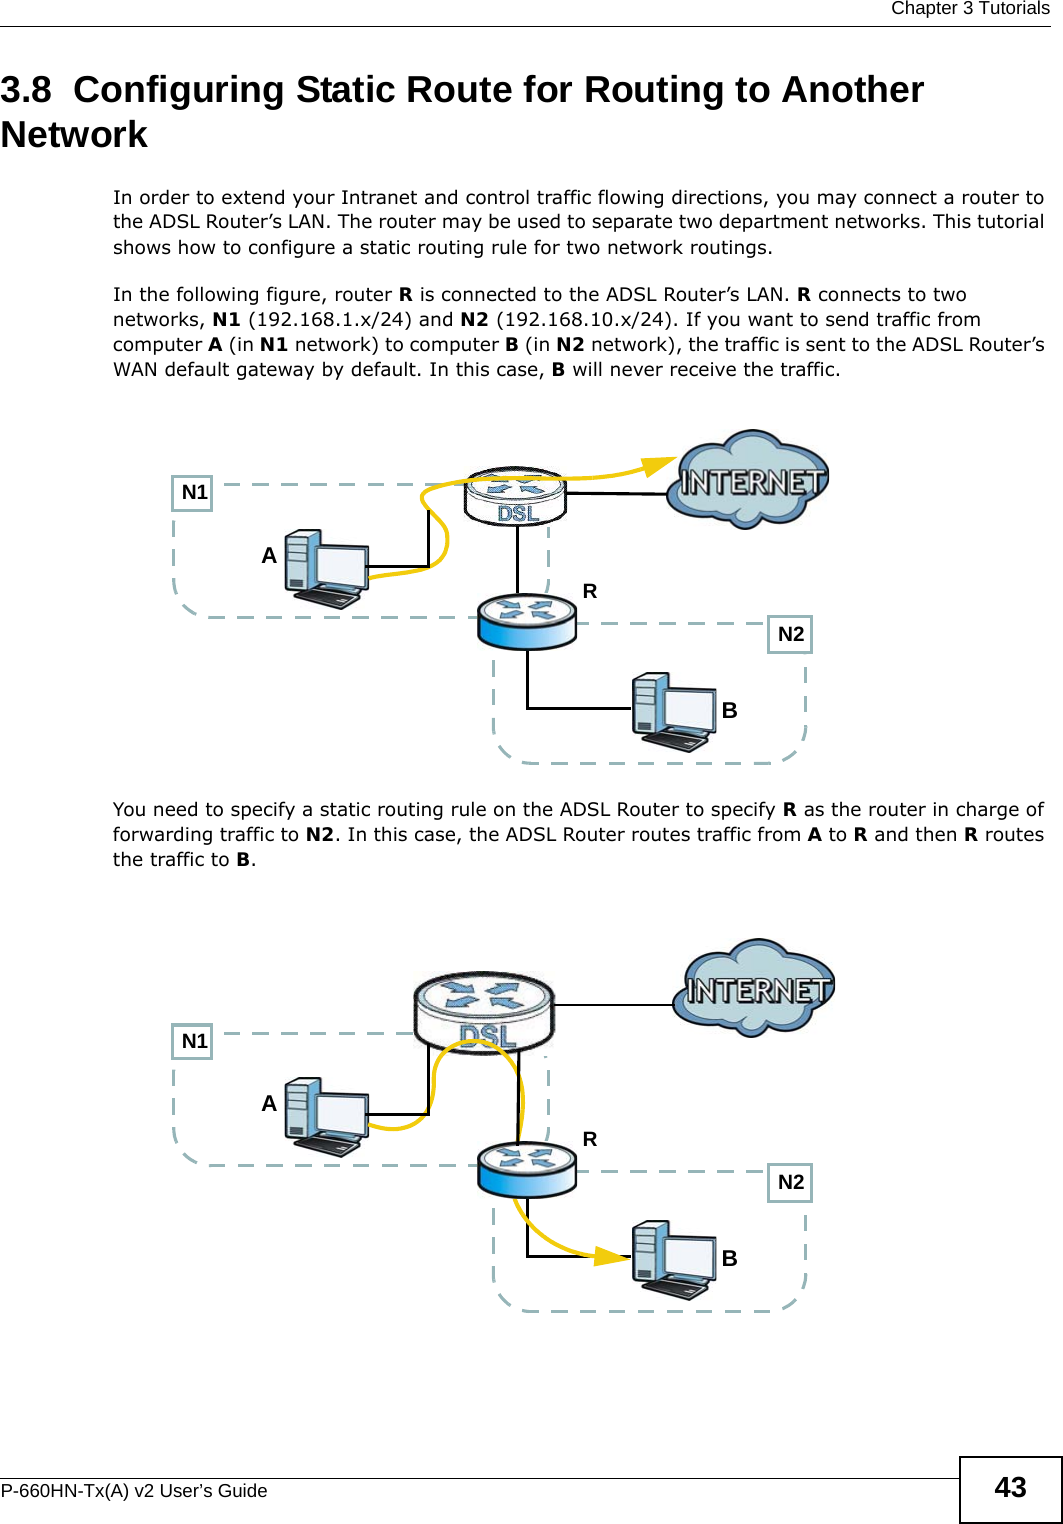  Chapter 3 TutorialsP-660HN-Tx(A) v2 User’s Guide 433.8  Configuring Static Route for Routing to Another NetworkIn order to extend your Intranet and control traffic flowing directions, you may connect a router to the ADSL Router’s LAN. The router may be used to separate two department networks. This tutorial shows how to configure a static routing rule for two network routings.In the following figure, router R is connected to the ADSL Router’s LAN. R connects to two networks, N1 (192.168.1.x/24) and N2 (192.168.10.x/24). If you want to send traffic from computer A (in N1 network) to computer B (in N2 network), the traffic is sent to the ADSL Router’s WAN default gateway by default. In this case, B will never receive the traffic.You need to specify a static routing rule on the ADSL Router to specify R as the router in charge of forwarding traffic to N2. In this case, the ADSL Router routes traffic from A to R and then R routes the traffic to B.N2BN1ARN2BN1AR